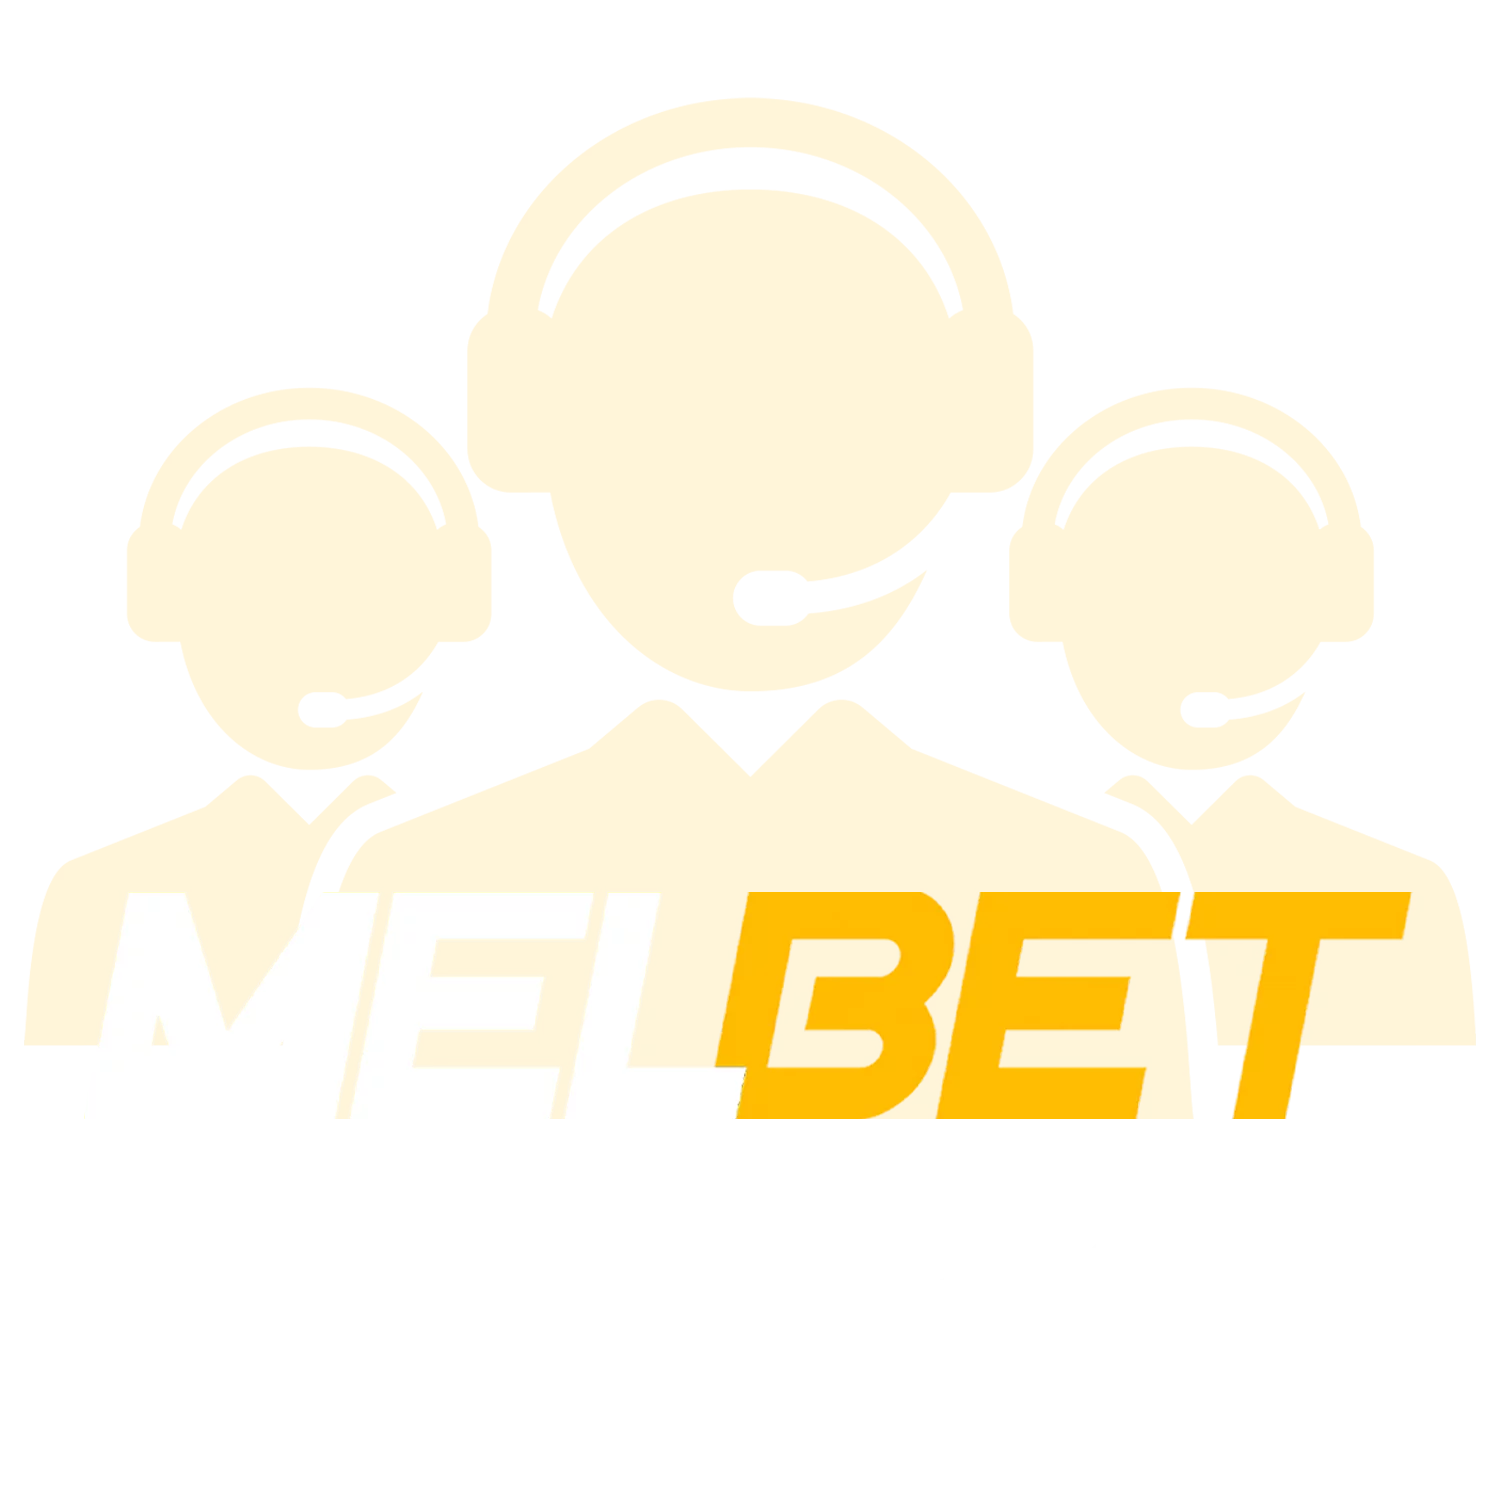 Melbet's customer service in Bangladesh is available 24 hours a day.